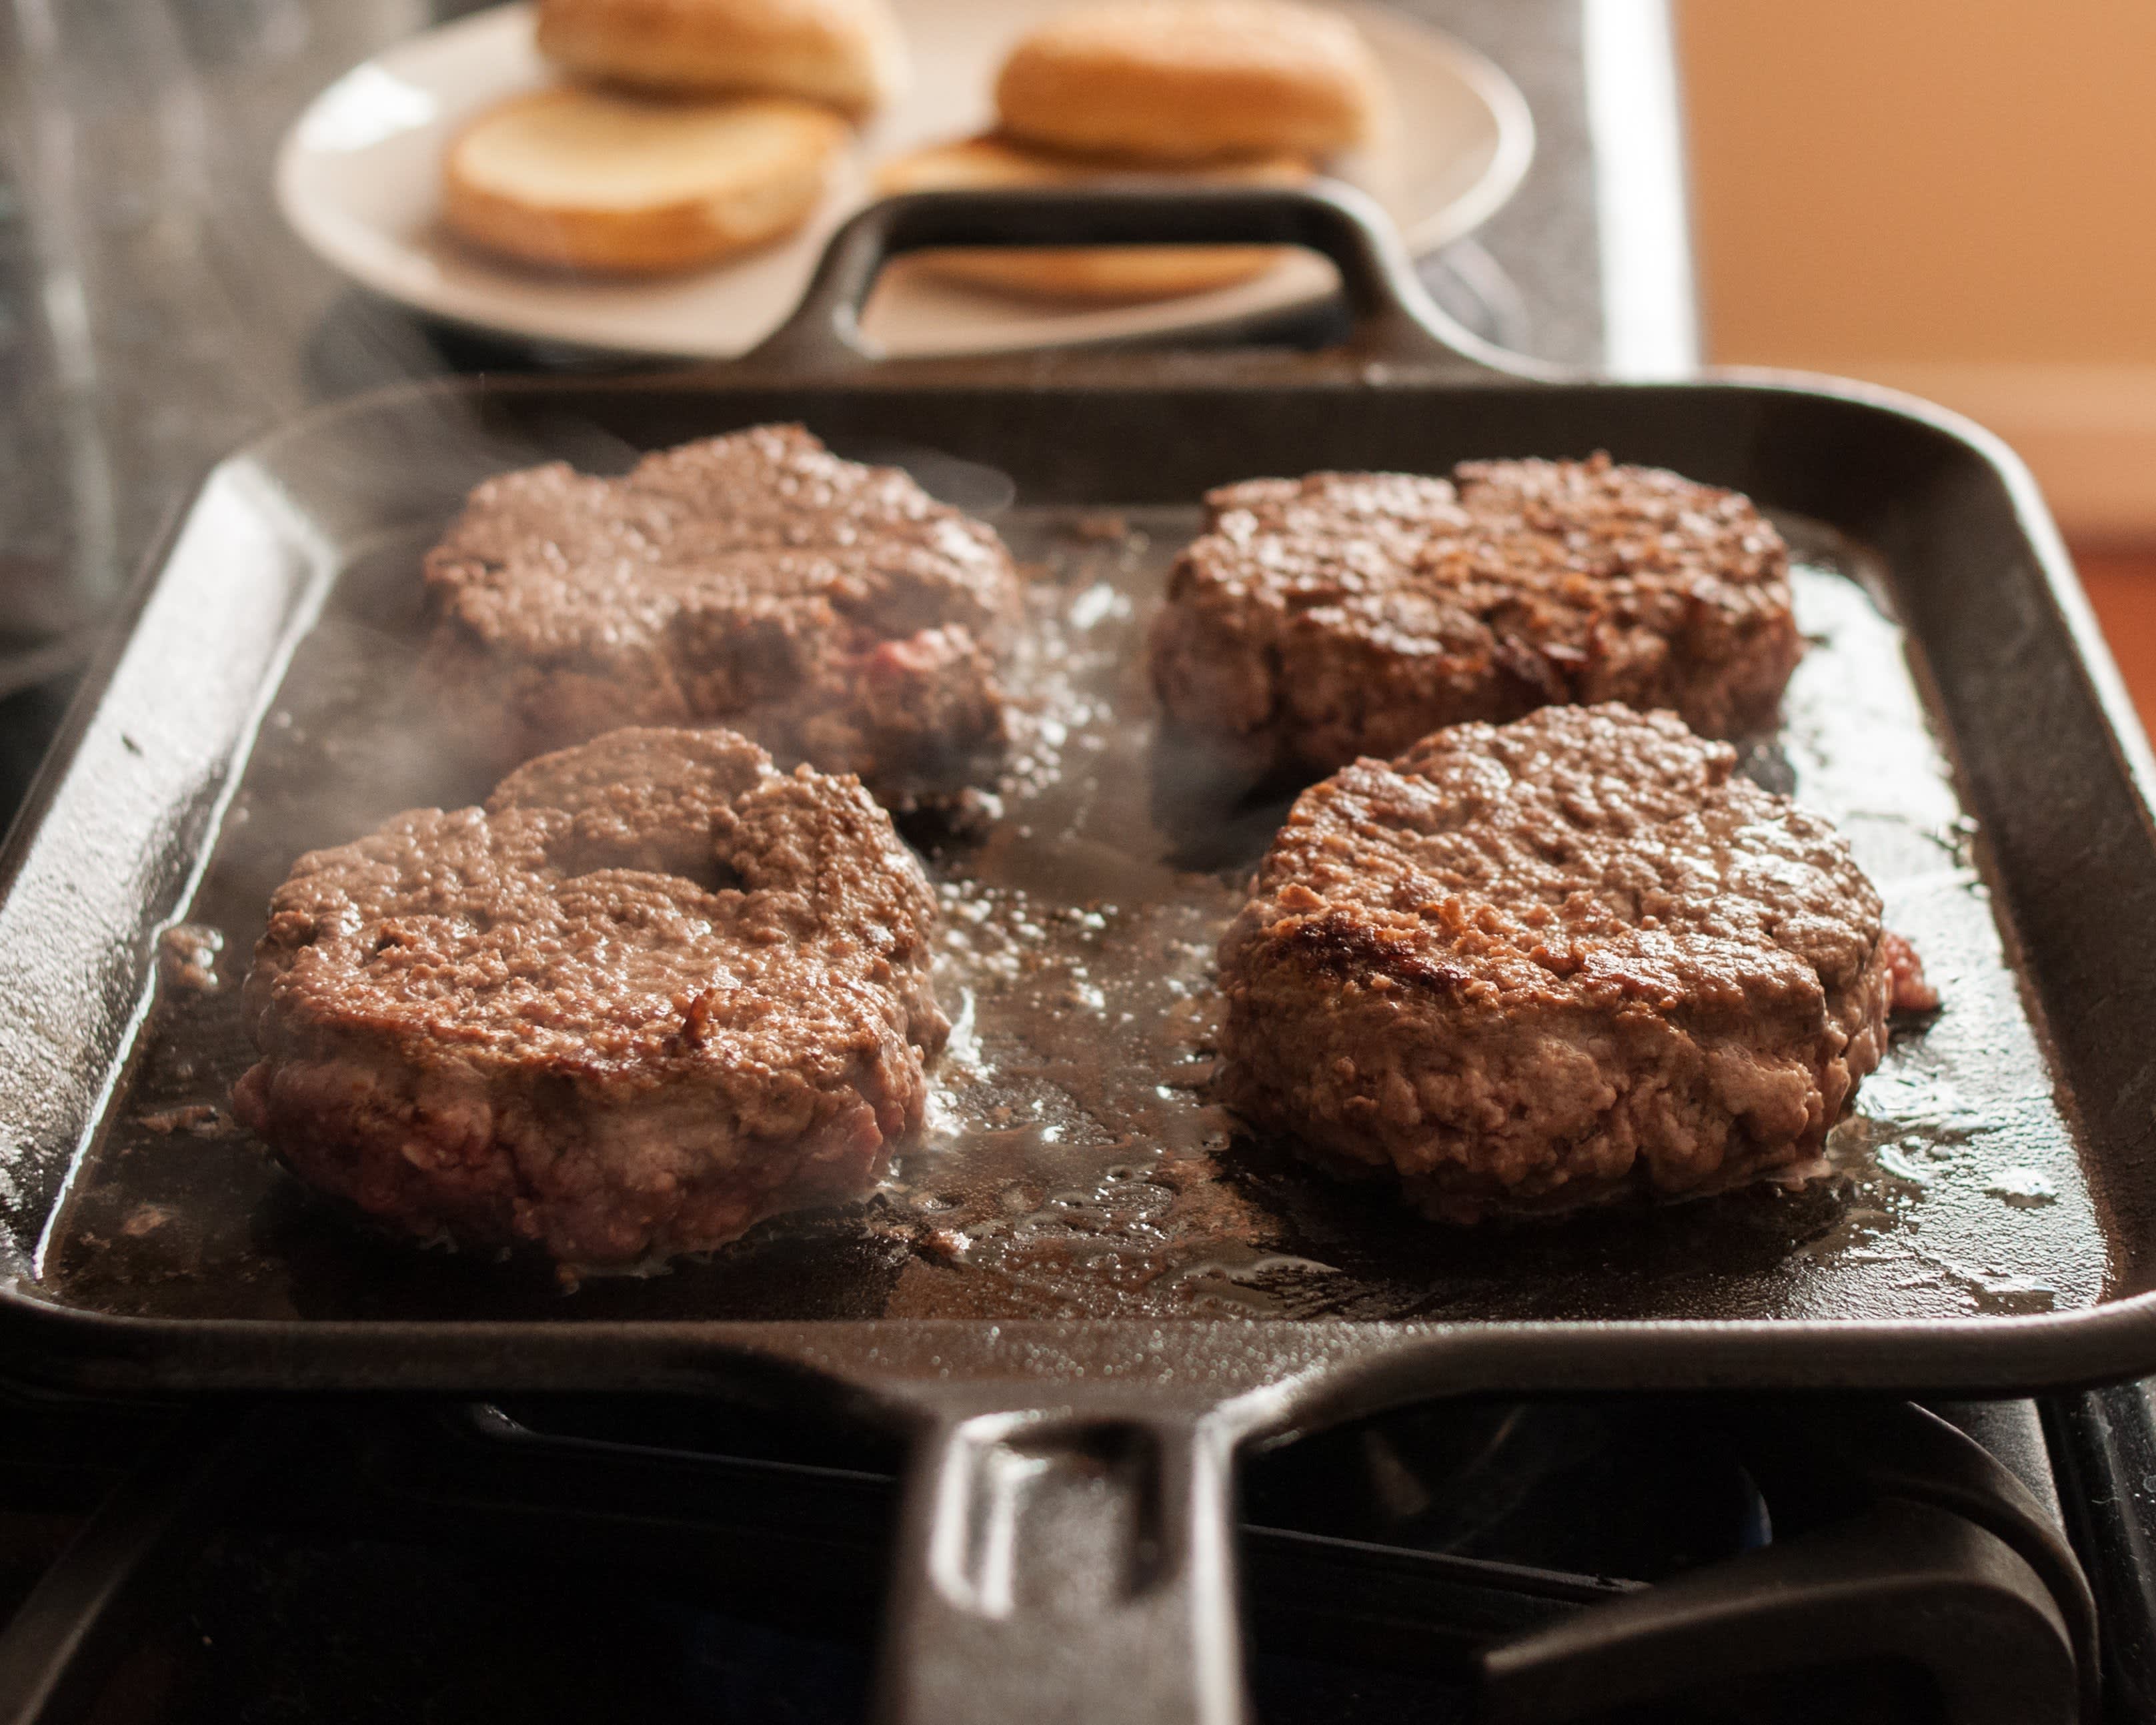 How to Cook a Burger on the Stove